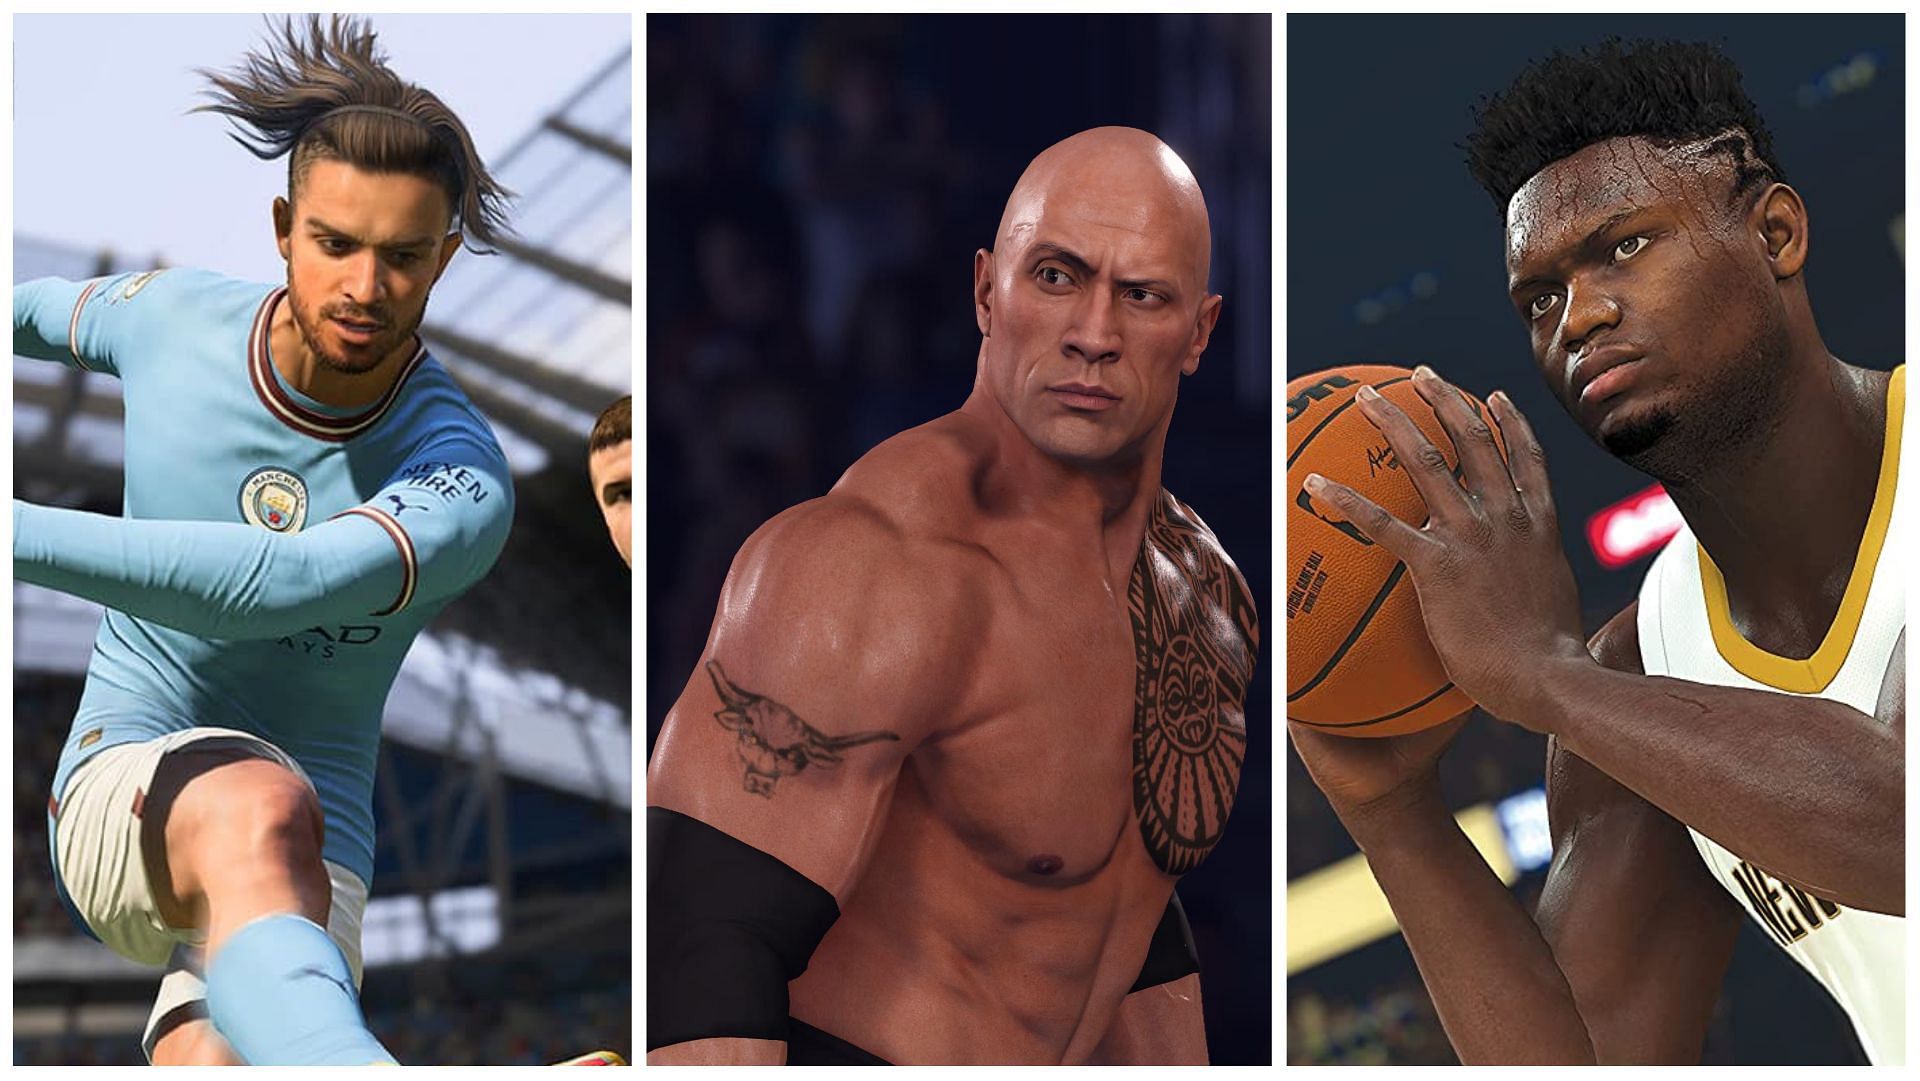 These video games capture the attention of sports fans every year (Images via EA Sports and 2K)